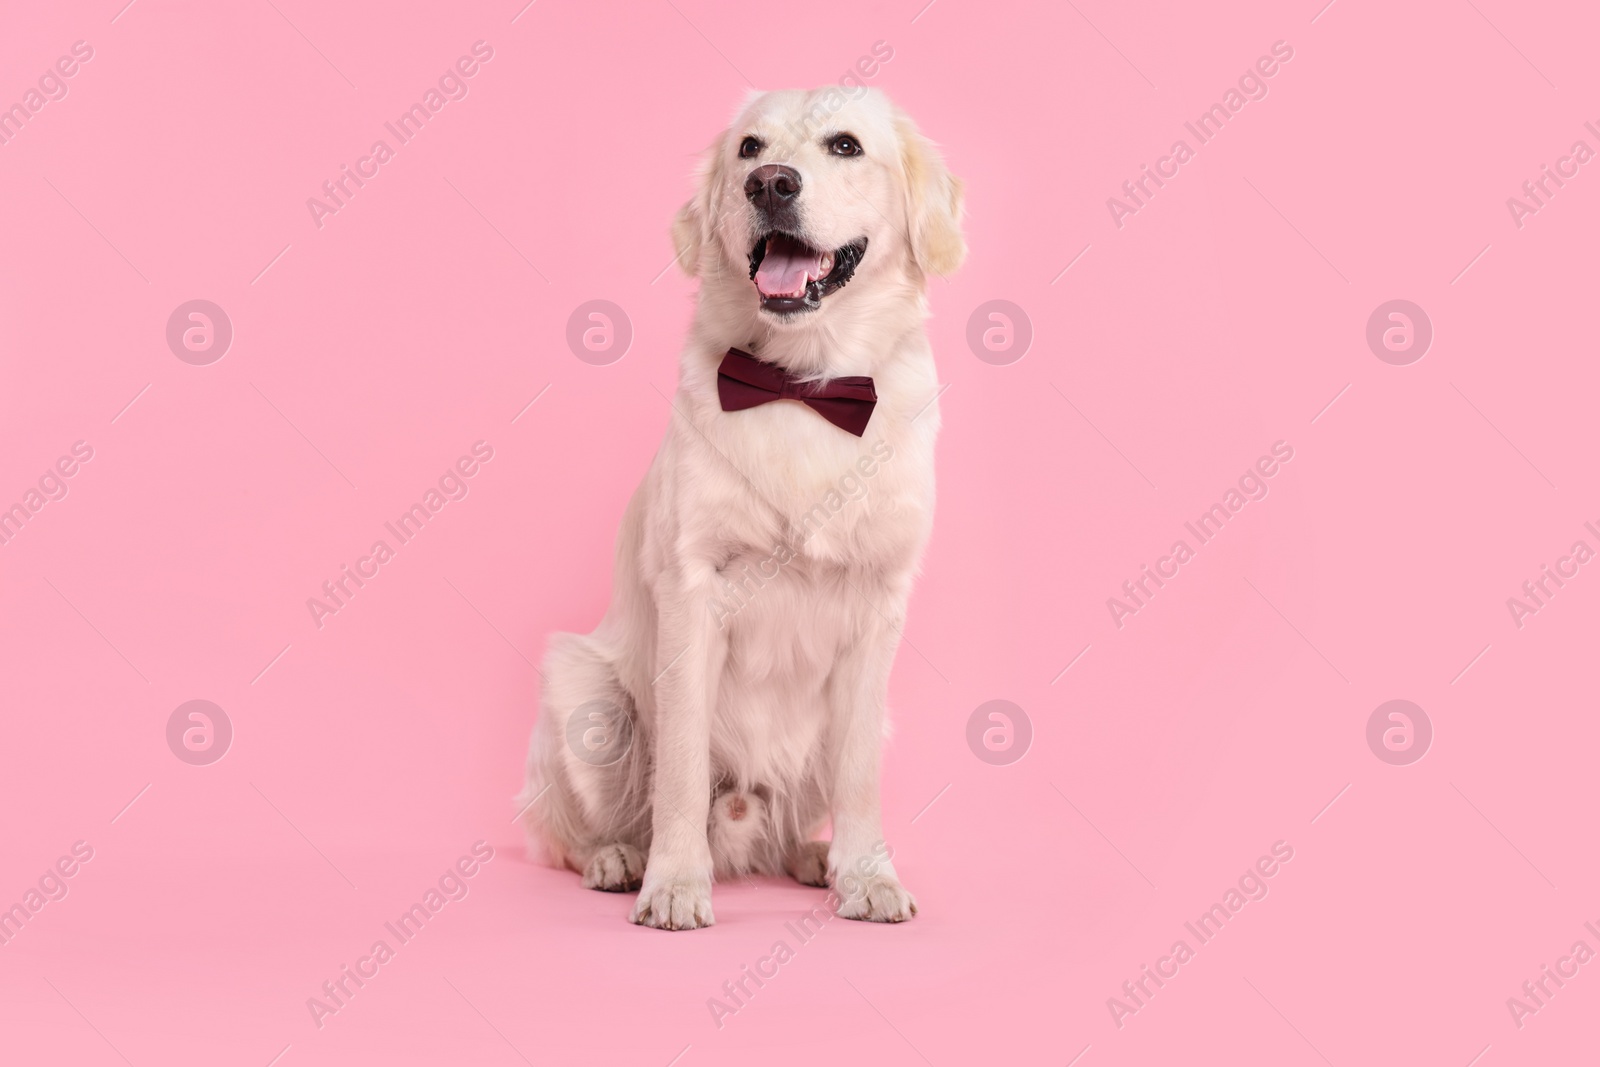 Photo of Cute Labrador Retriever with stylish bow tie on pink background